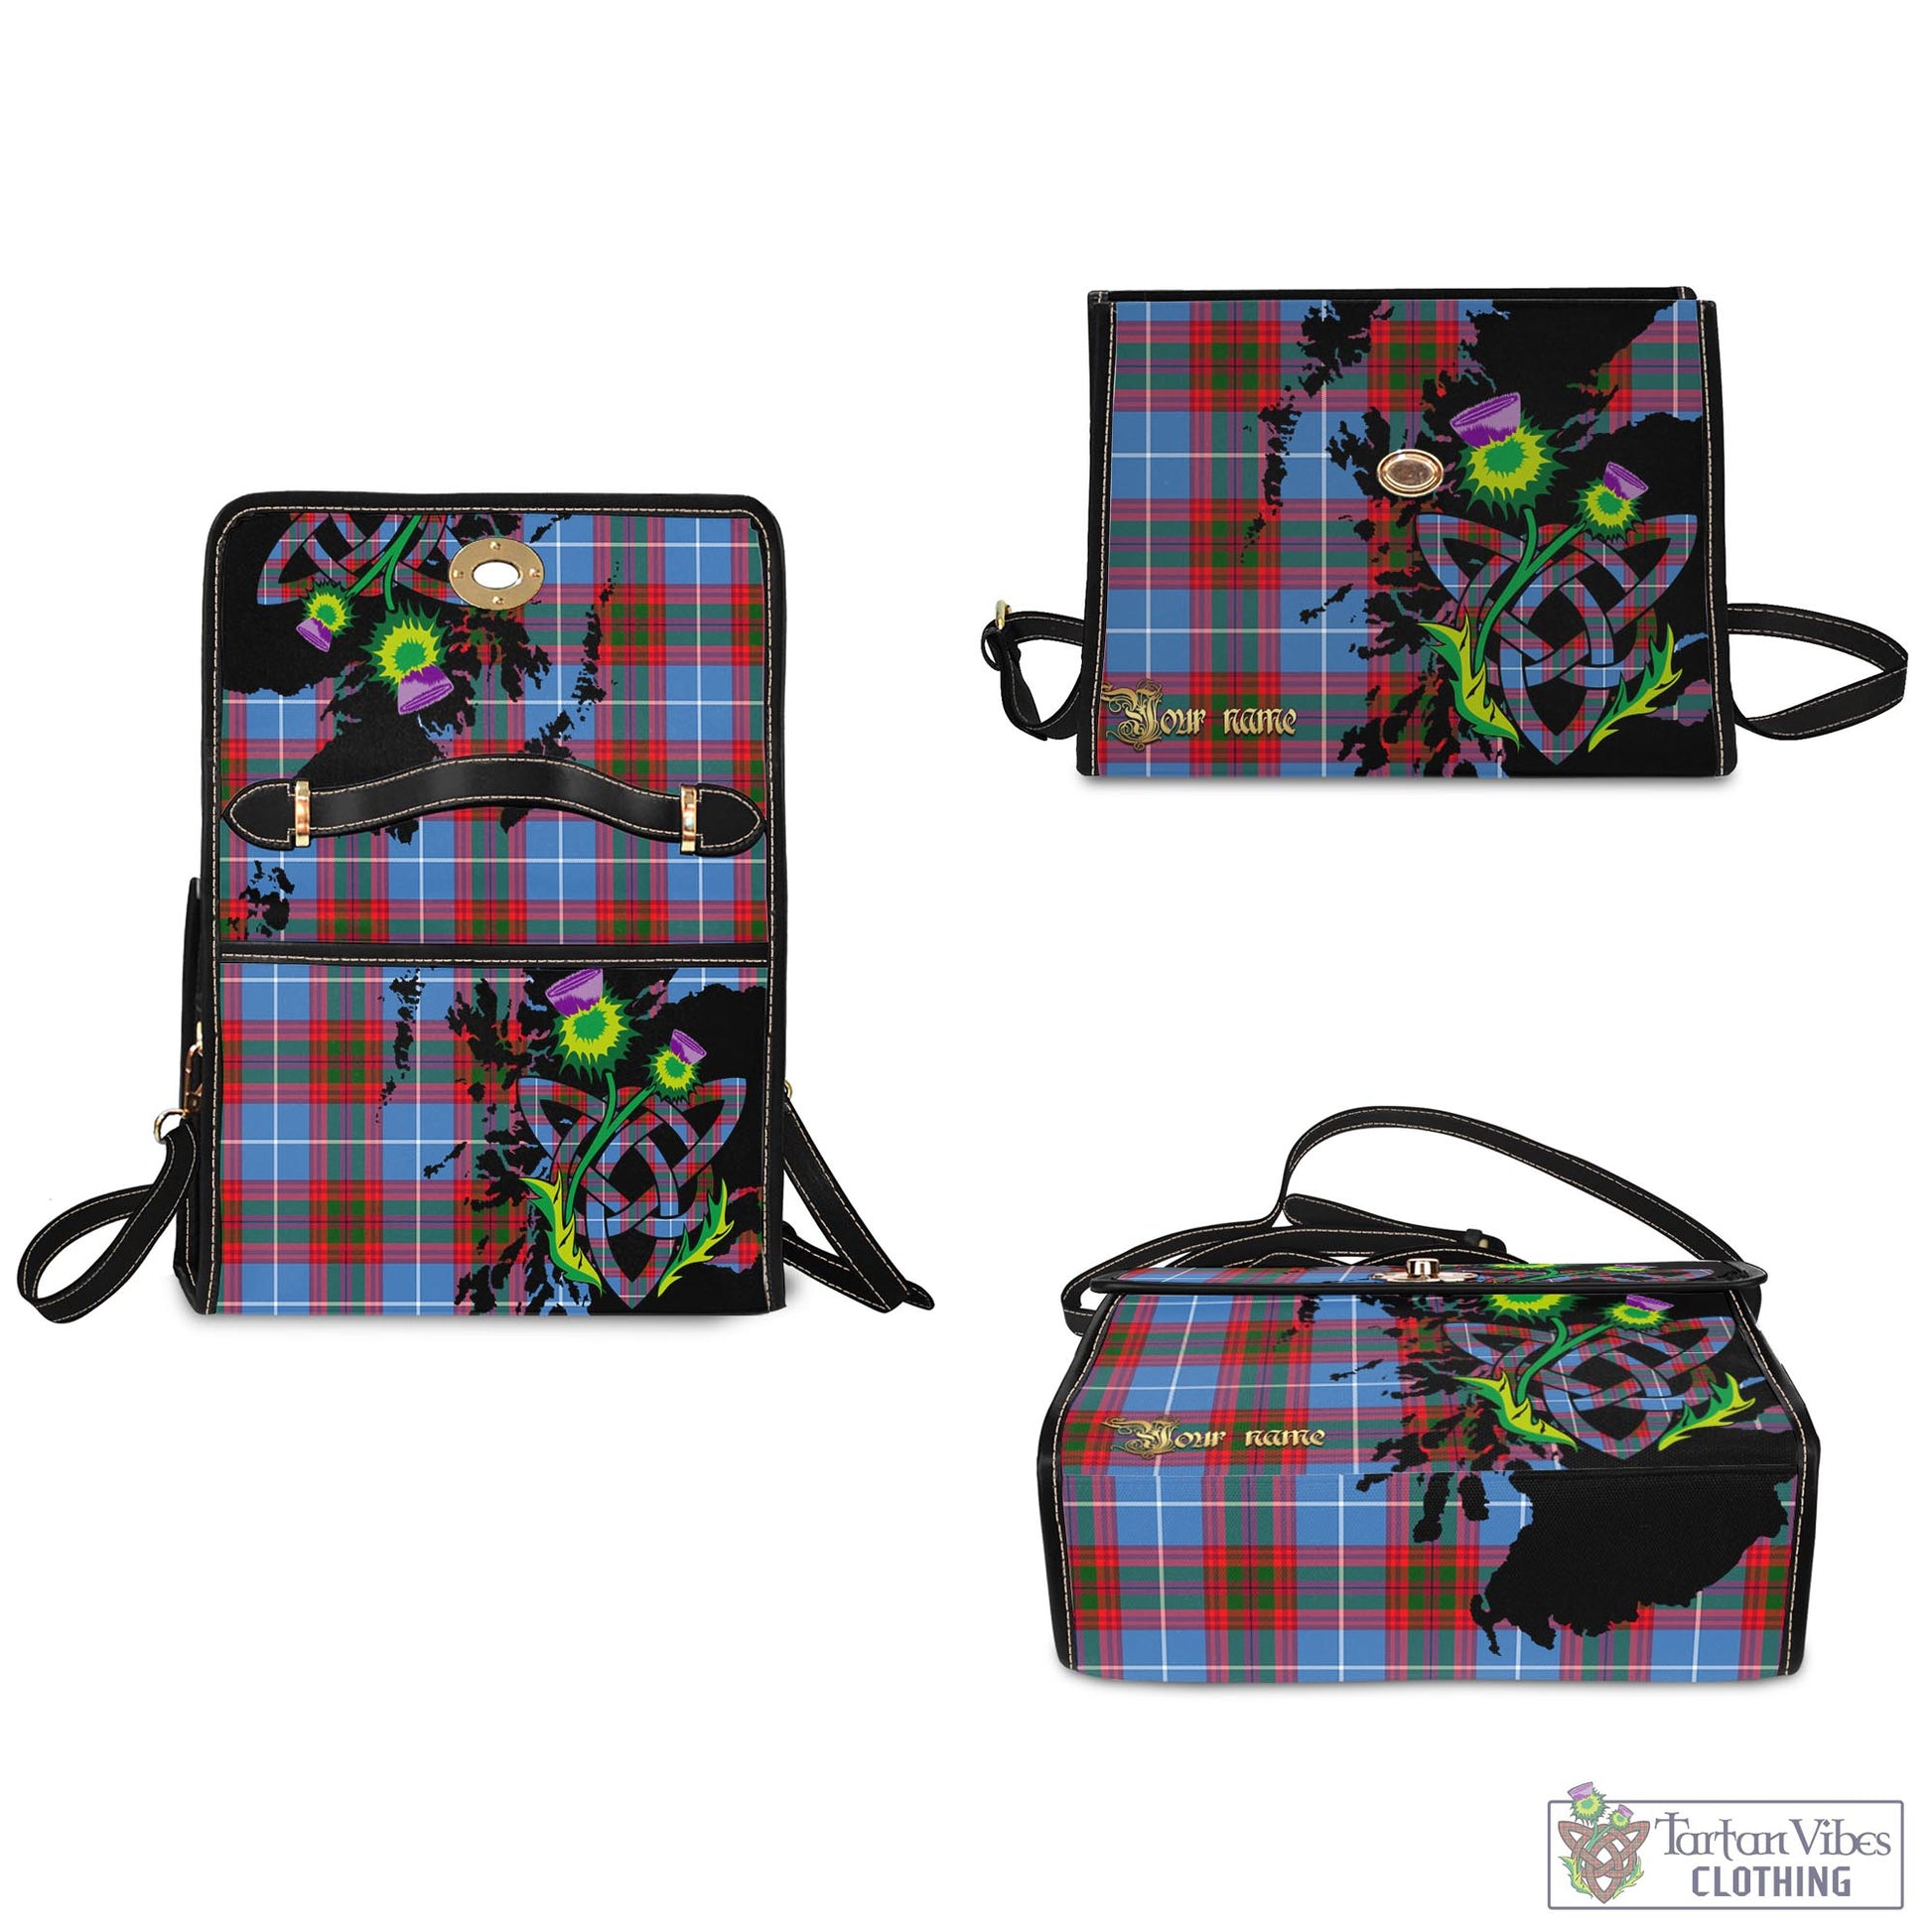 Tartan Vibes Clothing Pentland Tartan Waterproof Canvas Bag with Scotland Map and Thistle Celtic Accents